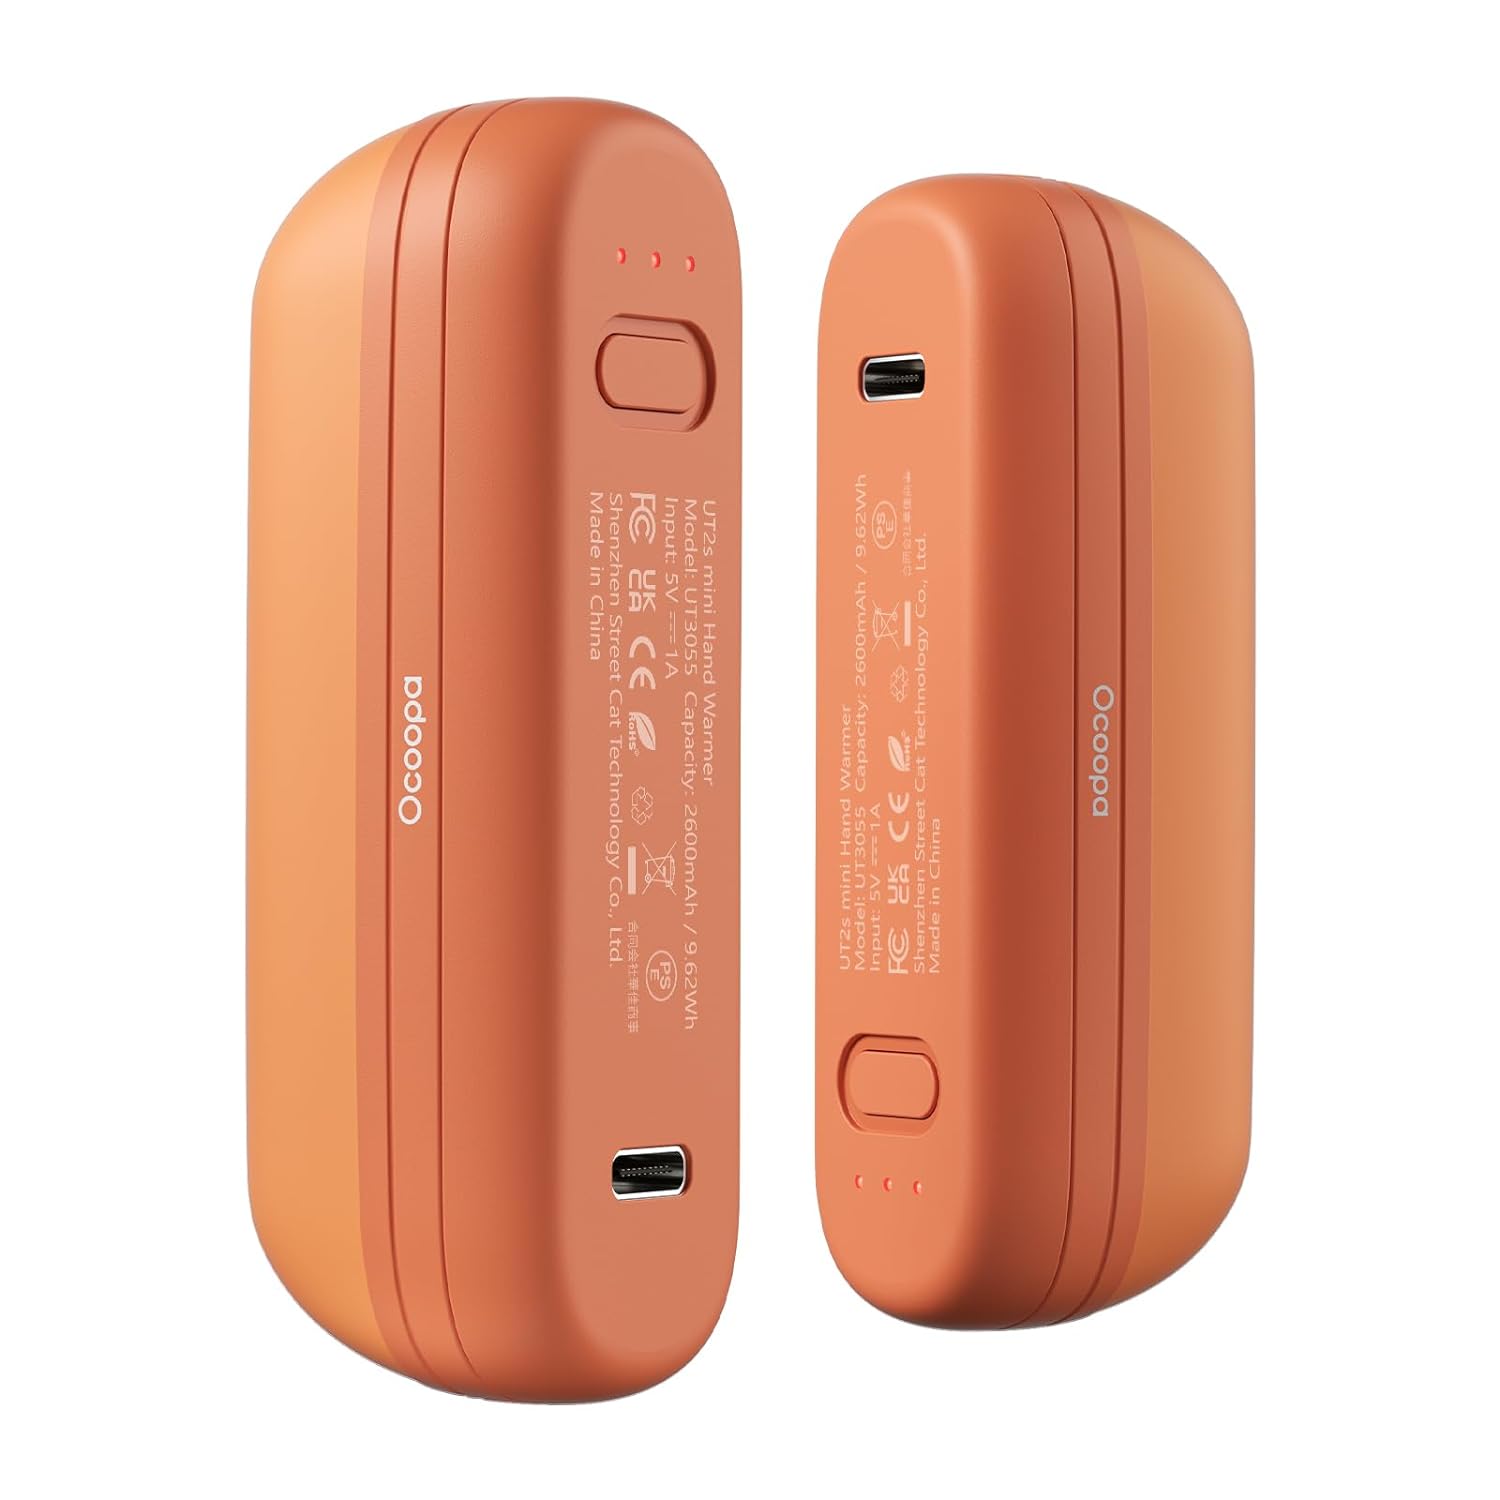 OCOOPA Hand Warmers Rechargeable 2 Pack, Magnetic Electric Lightweight Heater 5200mAh, Pocket Size, UL Certified, USB-C, 3 Levels Heating Up to 131℉, Ideal Gifts for Camping, Raynauds, Golf, UT2S Mini